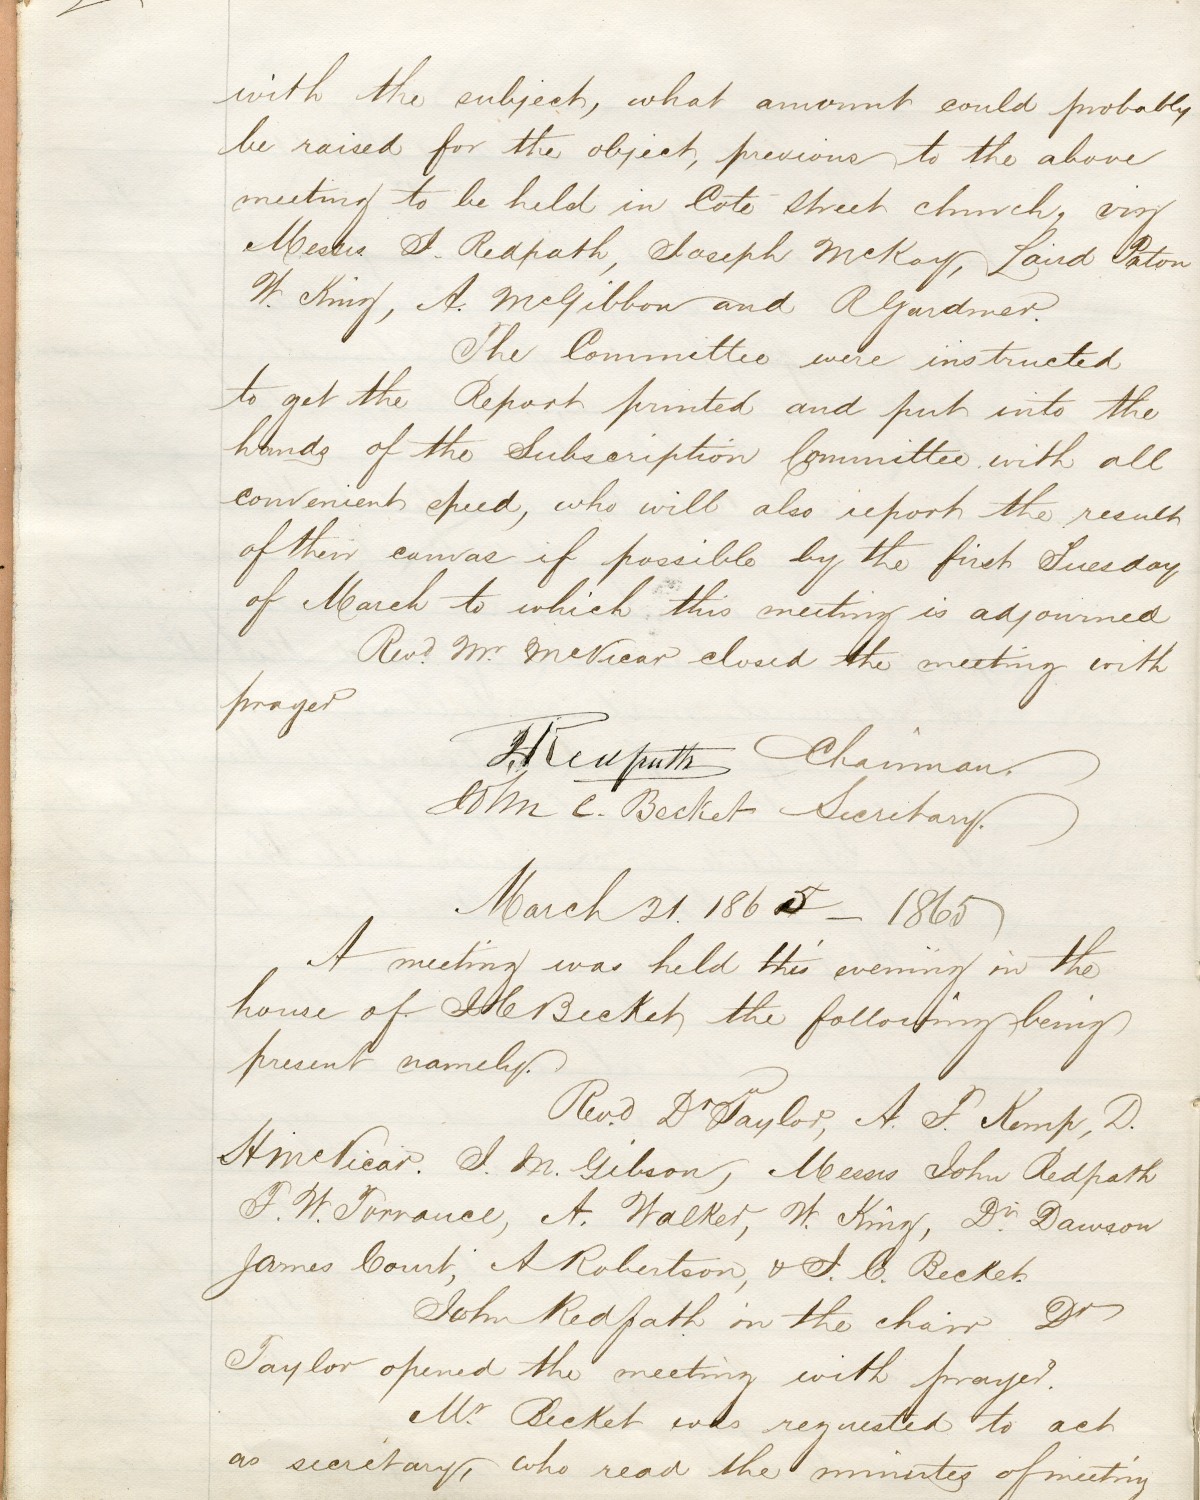 A letter regarding the opening of the College, issues included funding and a location for the College. The Letter is dated to 1864.